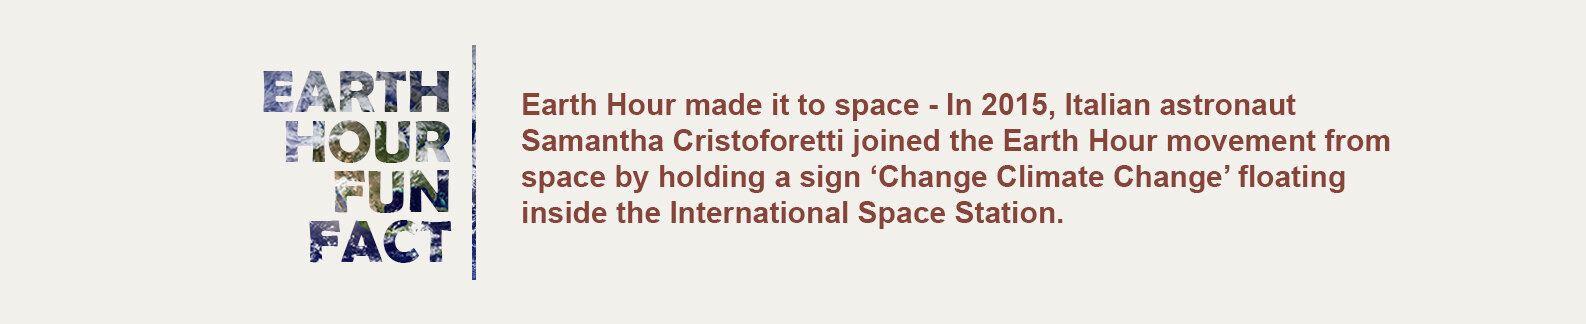 Earth Hour made it to space - In 2015, Italian astronaut Samantha Cristoforetti joined the Earth Hour movement from space by holding a sign ‘Change Climate Change’ floating inside the International Space Station.